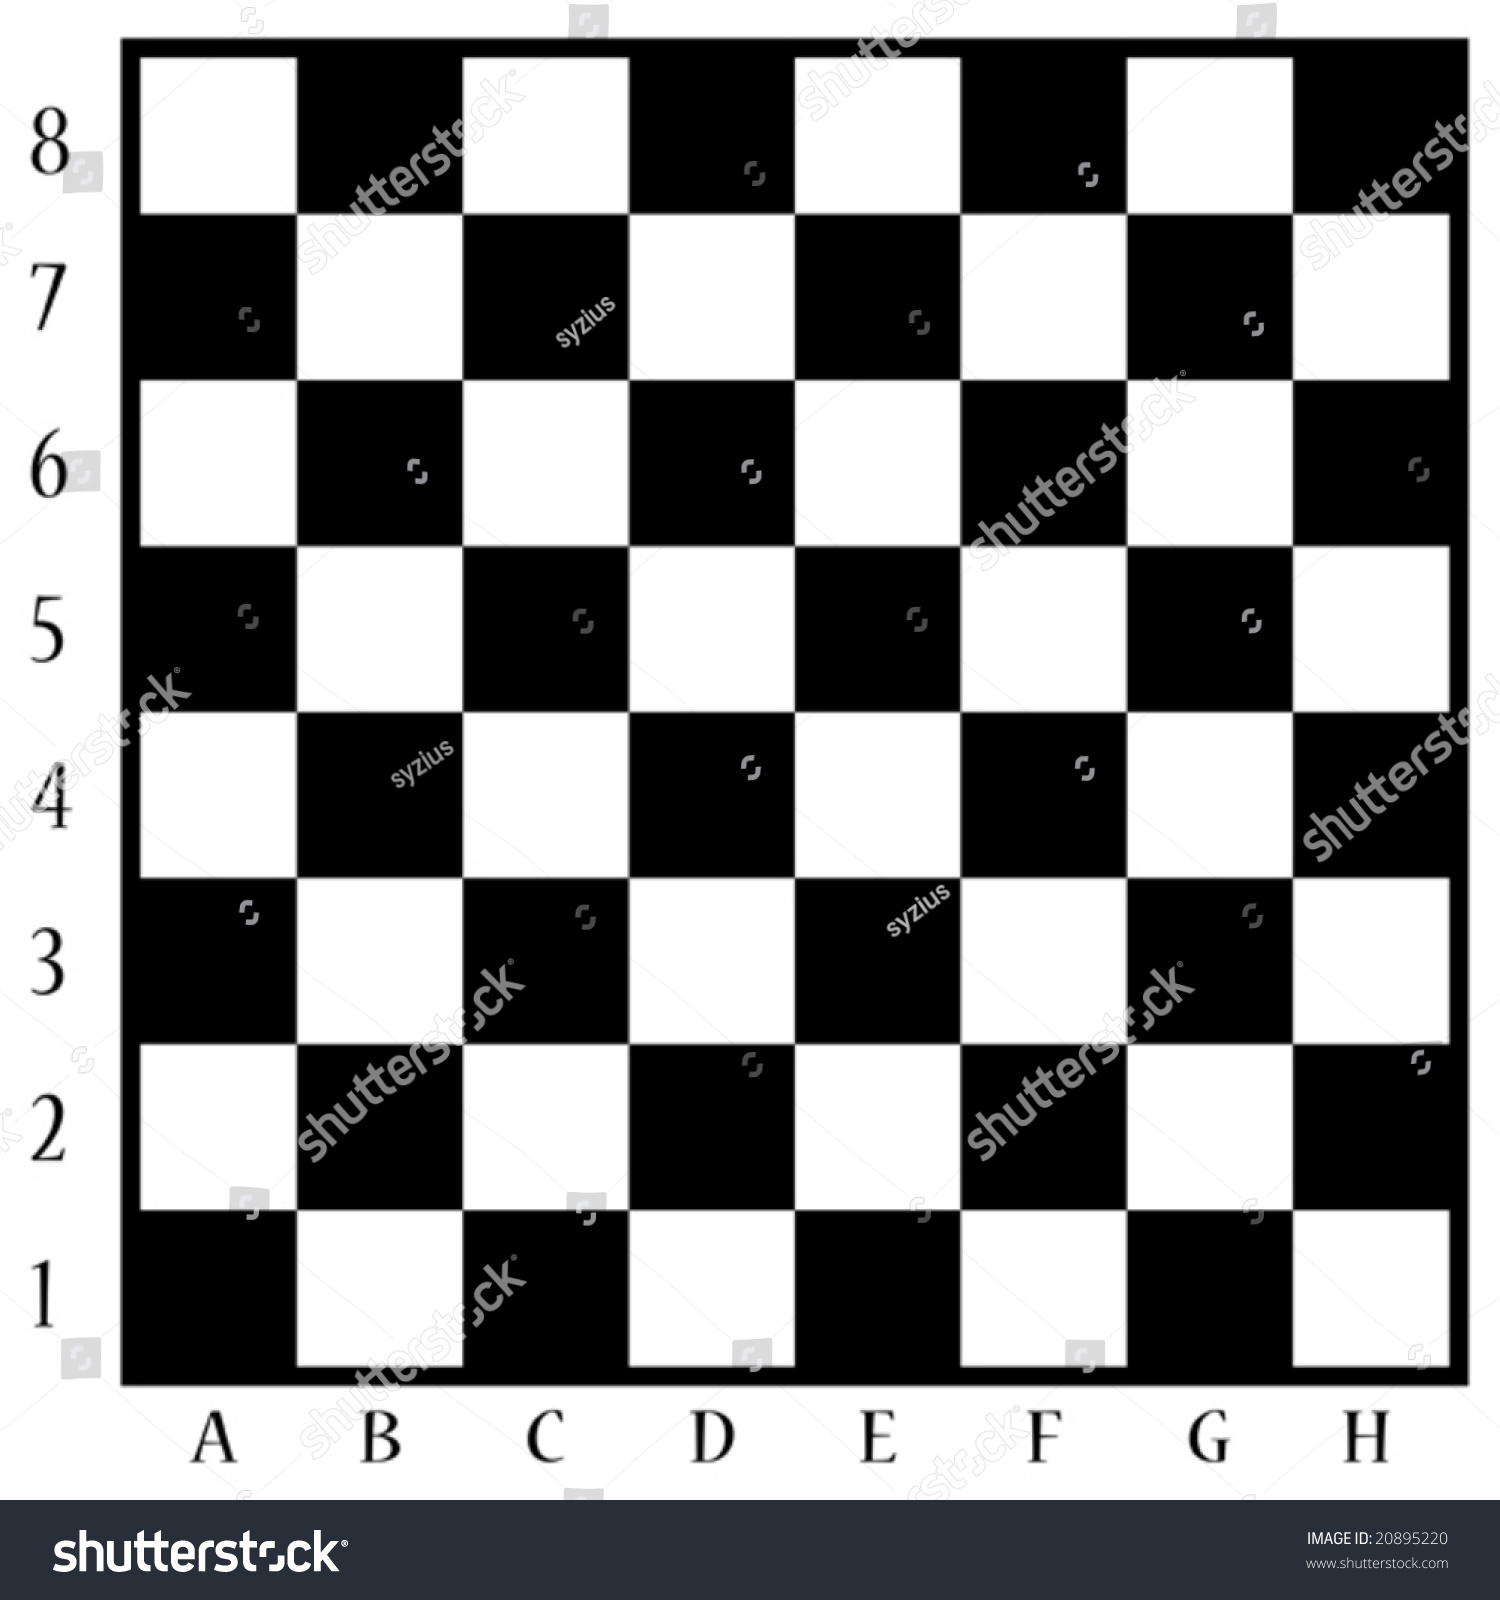 Chess board with numbers on the side